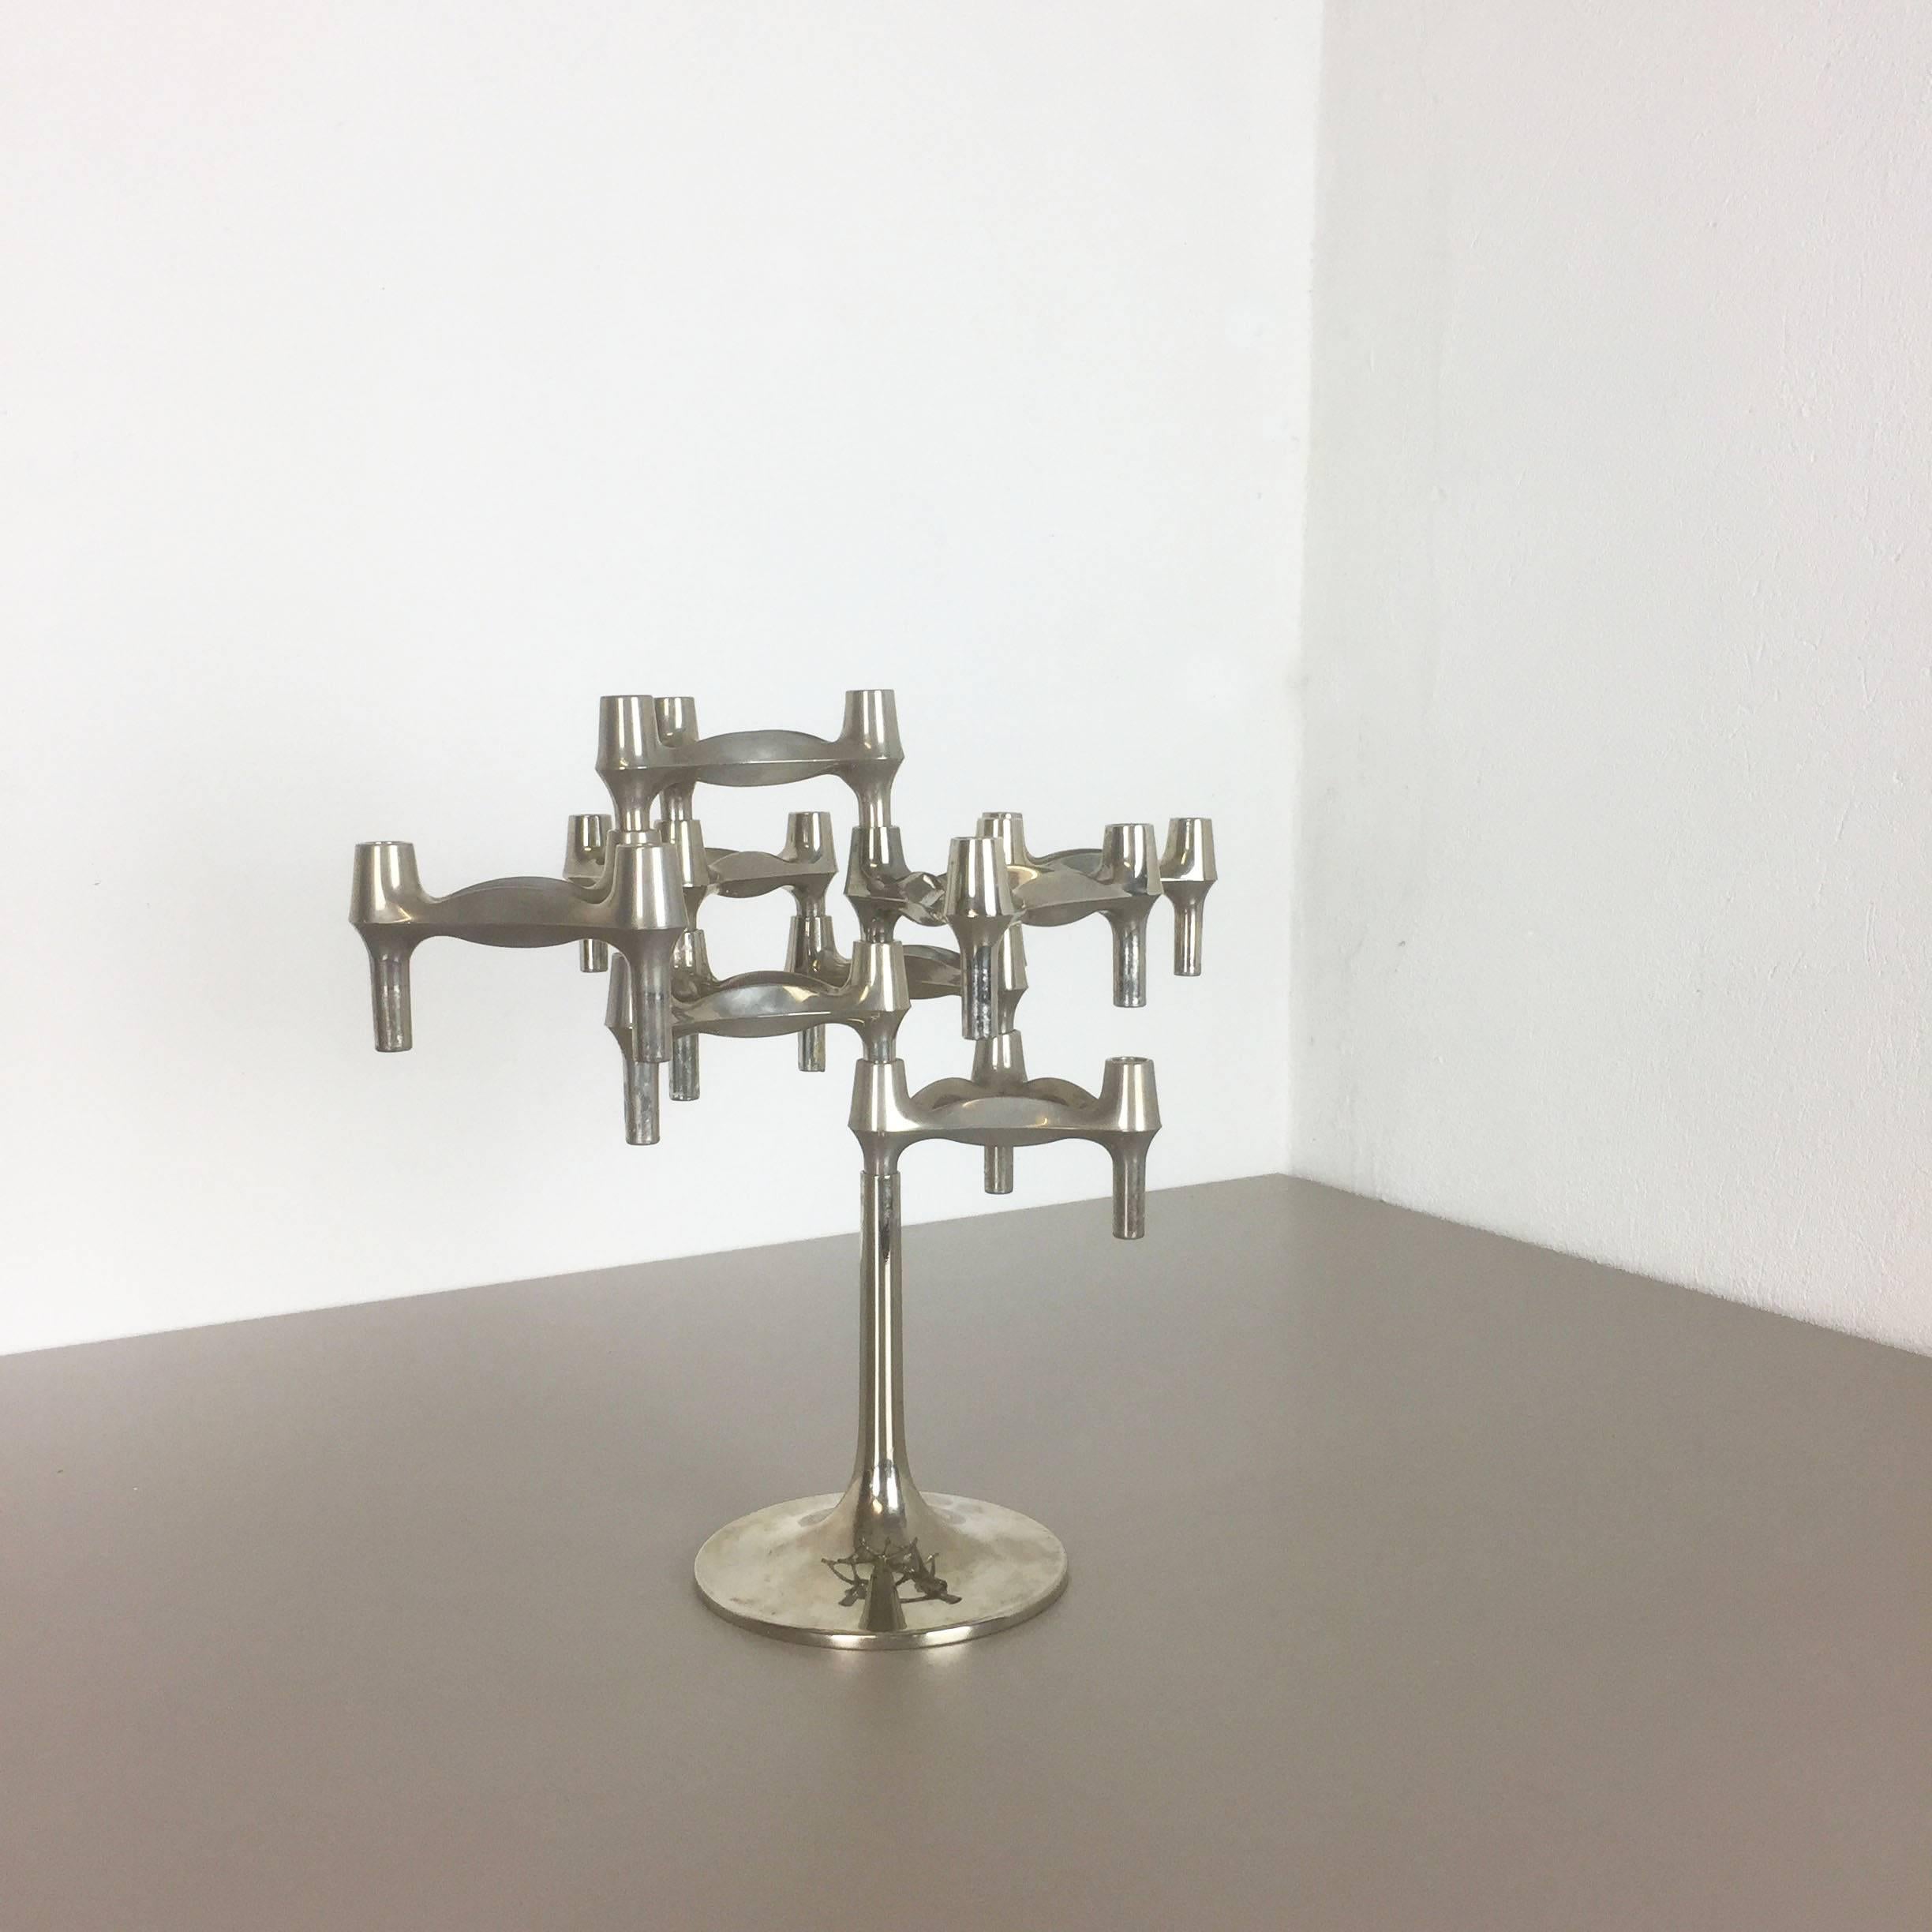 Article:

Metal candleholder sculpture


Producer:

BMF Nagel, Germany


Design:

Caesar Stoffi


Description:

This original vintage set of 8 metal candle holders and a super rare tulip base element, was produced in the 1970s in